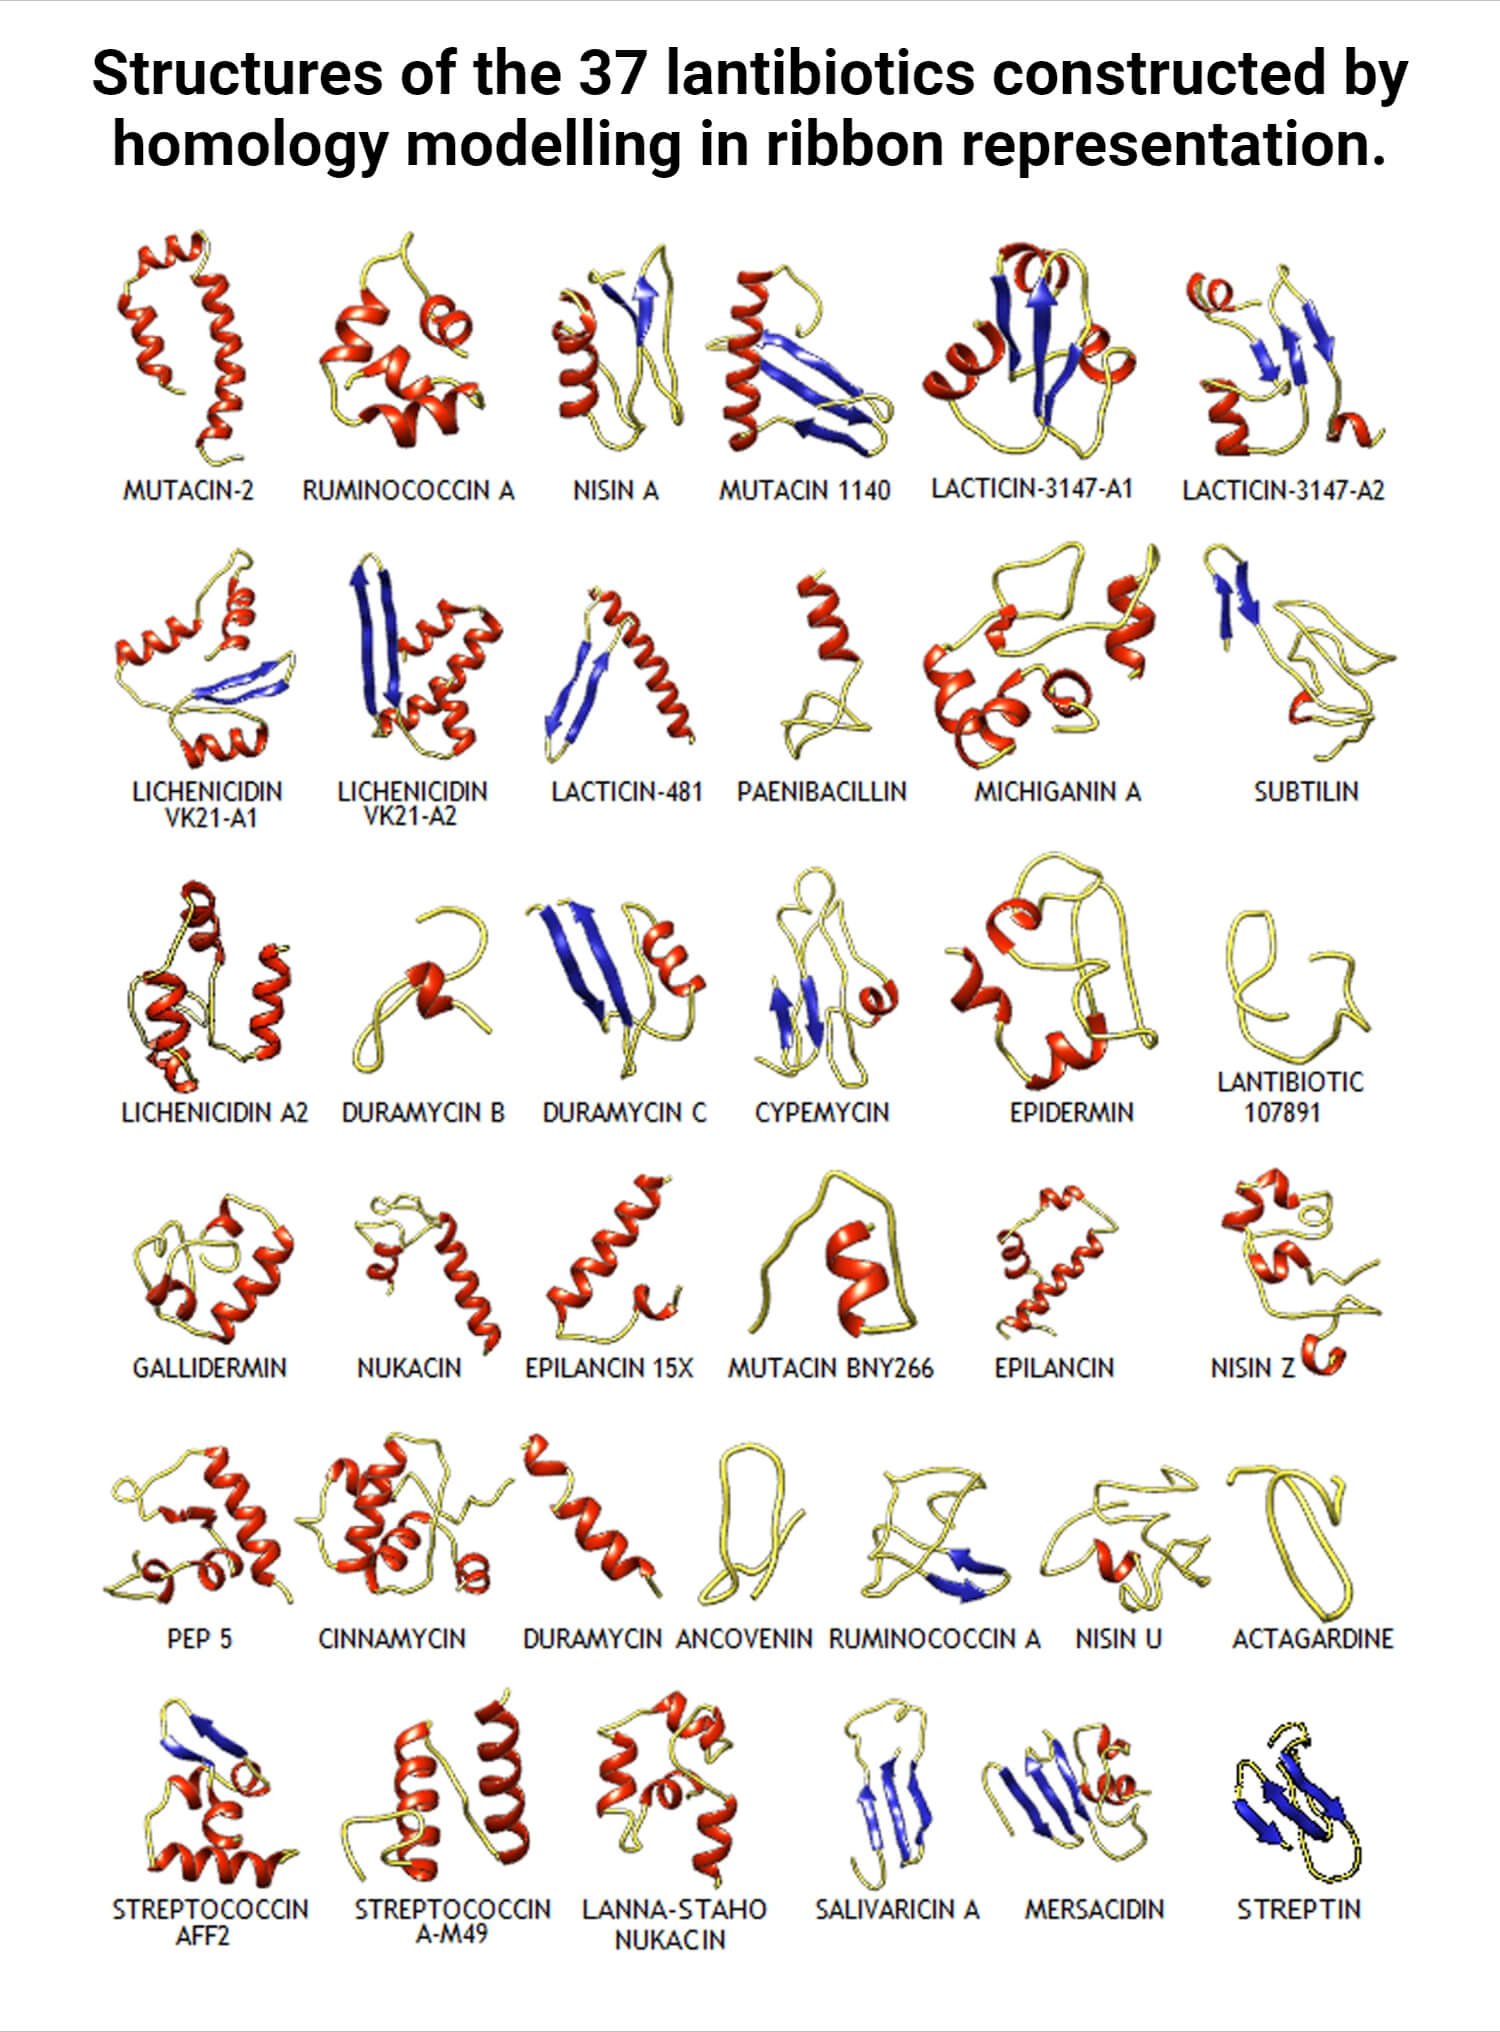 Structures of the 37 lantibiotics constructed by homology modelling in ribbon representation